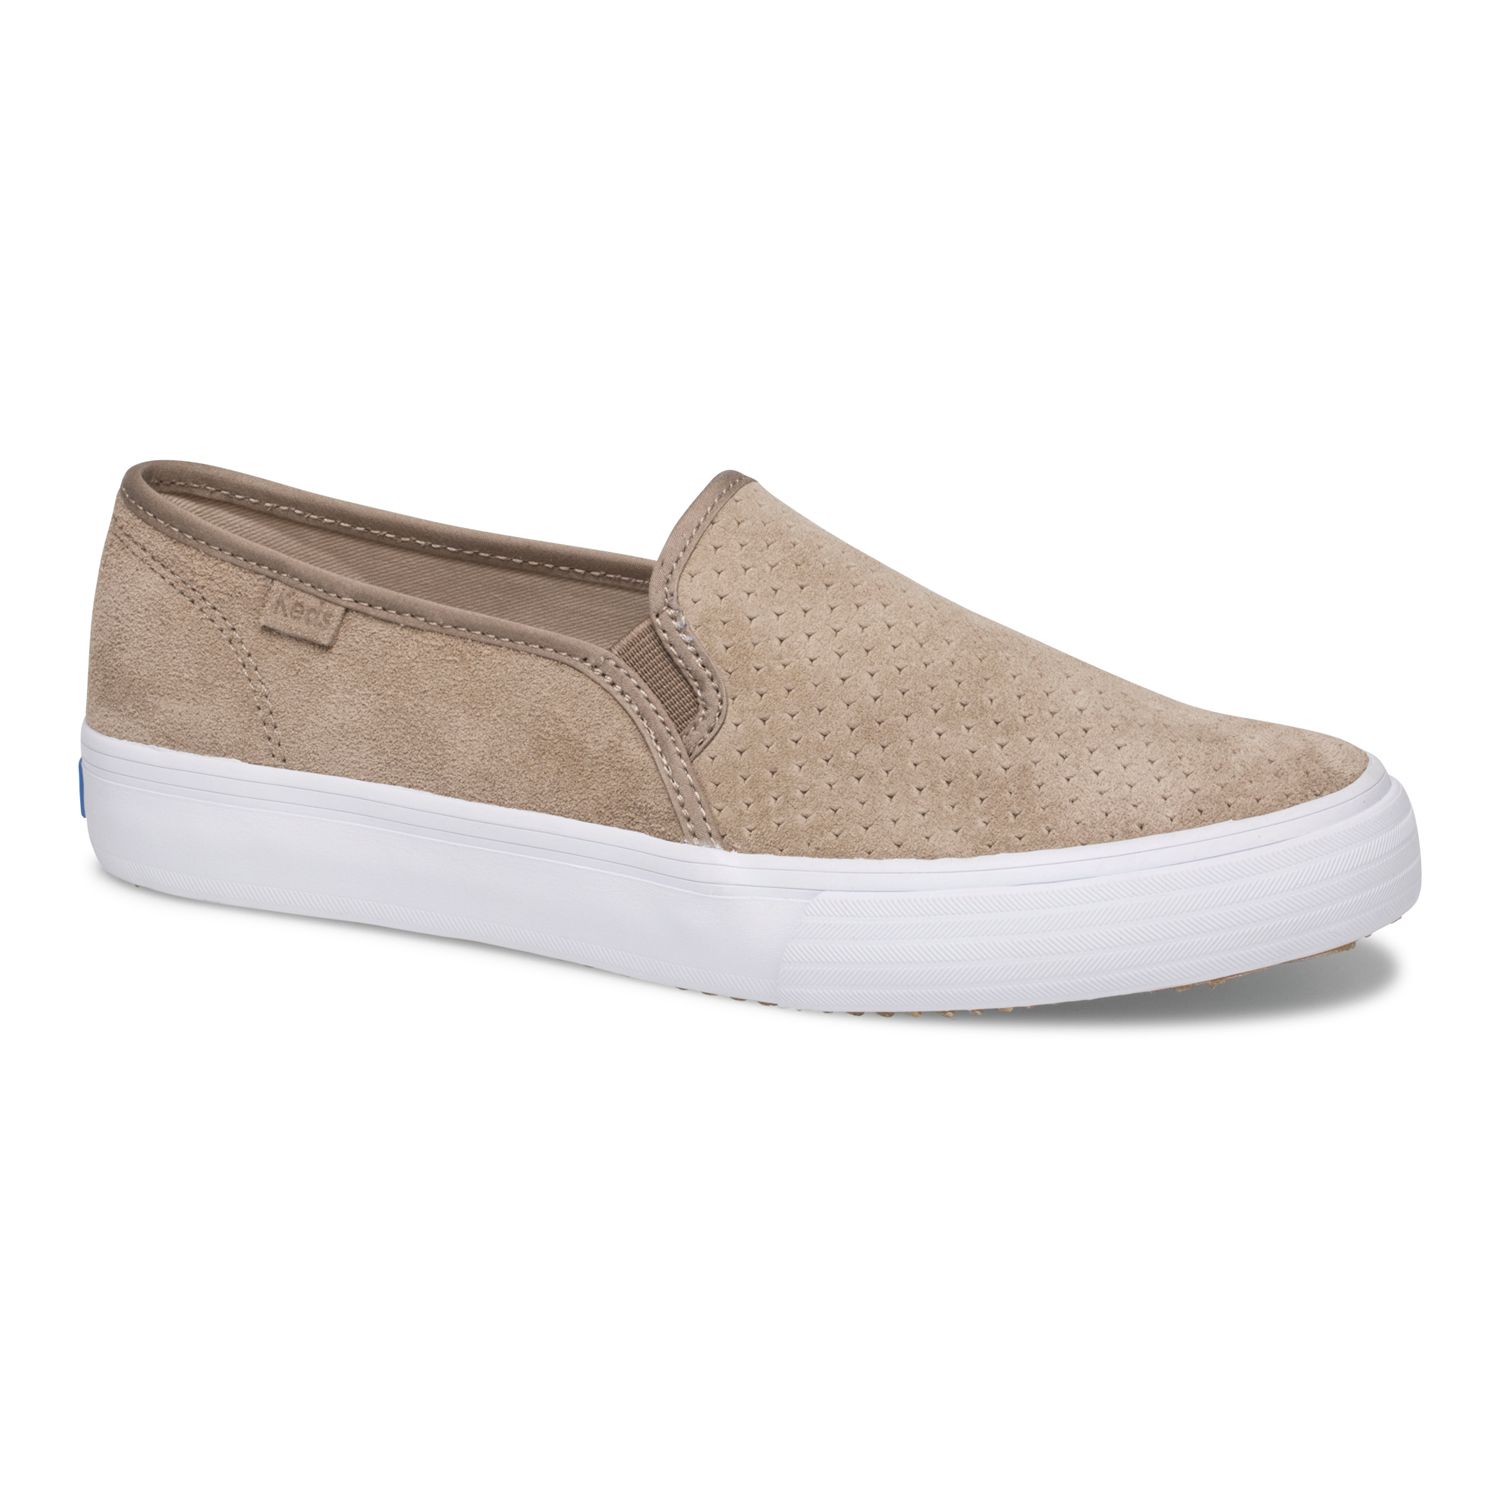 Keds Double Decker Perforated Suede 